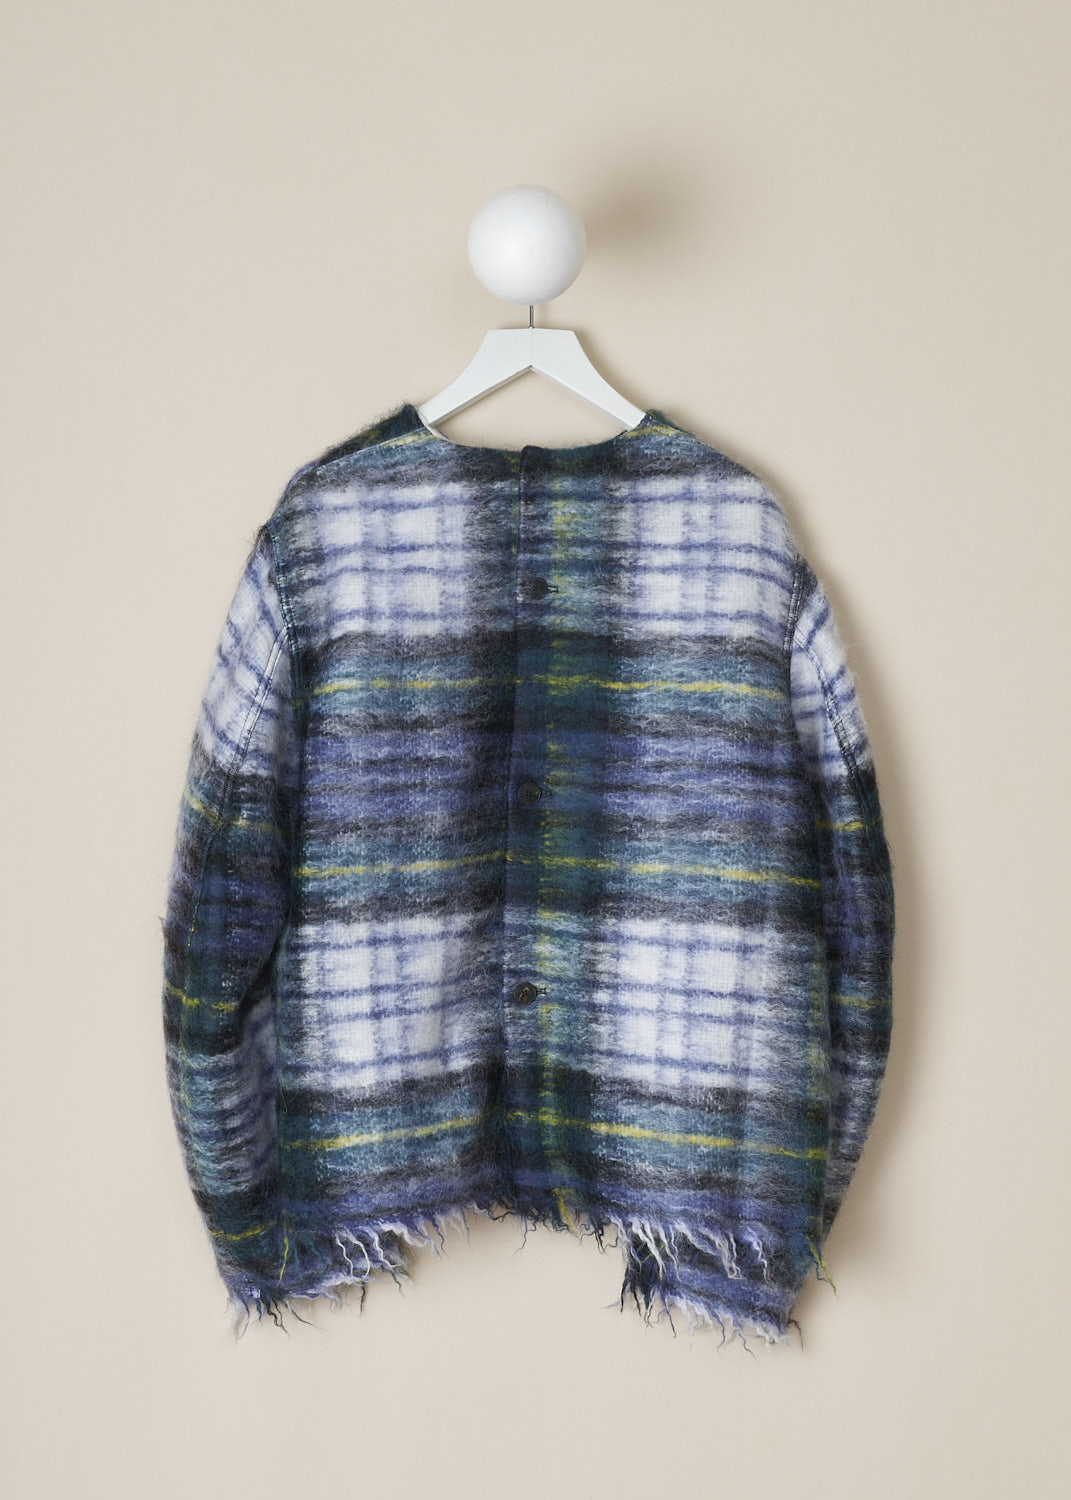 SOFIE Dâ€™HOORE, GREEN TARTAN BING TOP, BING_WOMO_GREEN_TARTAN, Green, Blue, Print, Back, This green tartan mohair-blend Bing top has a round neckline and long sleeves. Slanted pockets are concealed in the side seams. The sleeves and hemline have a raw finish. In the back, the top has a snap button closure. The top is fully lined. 
